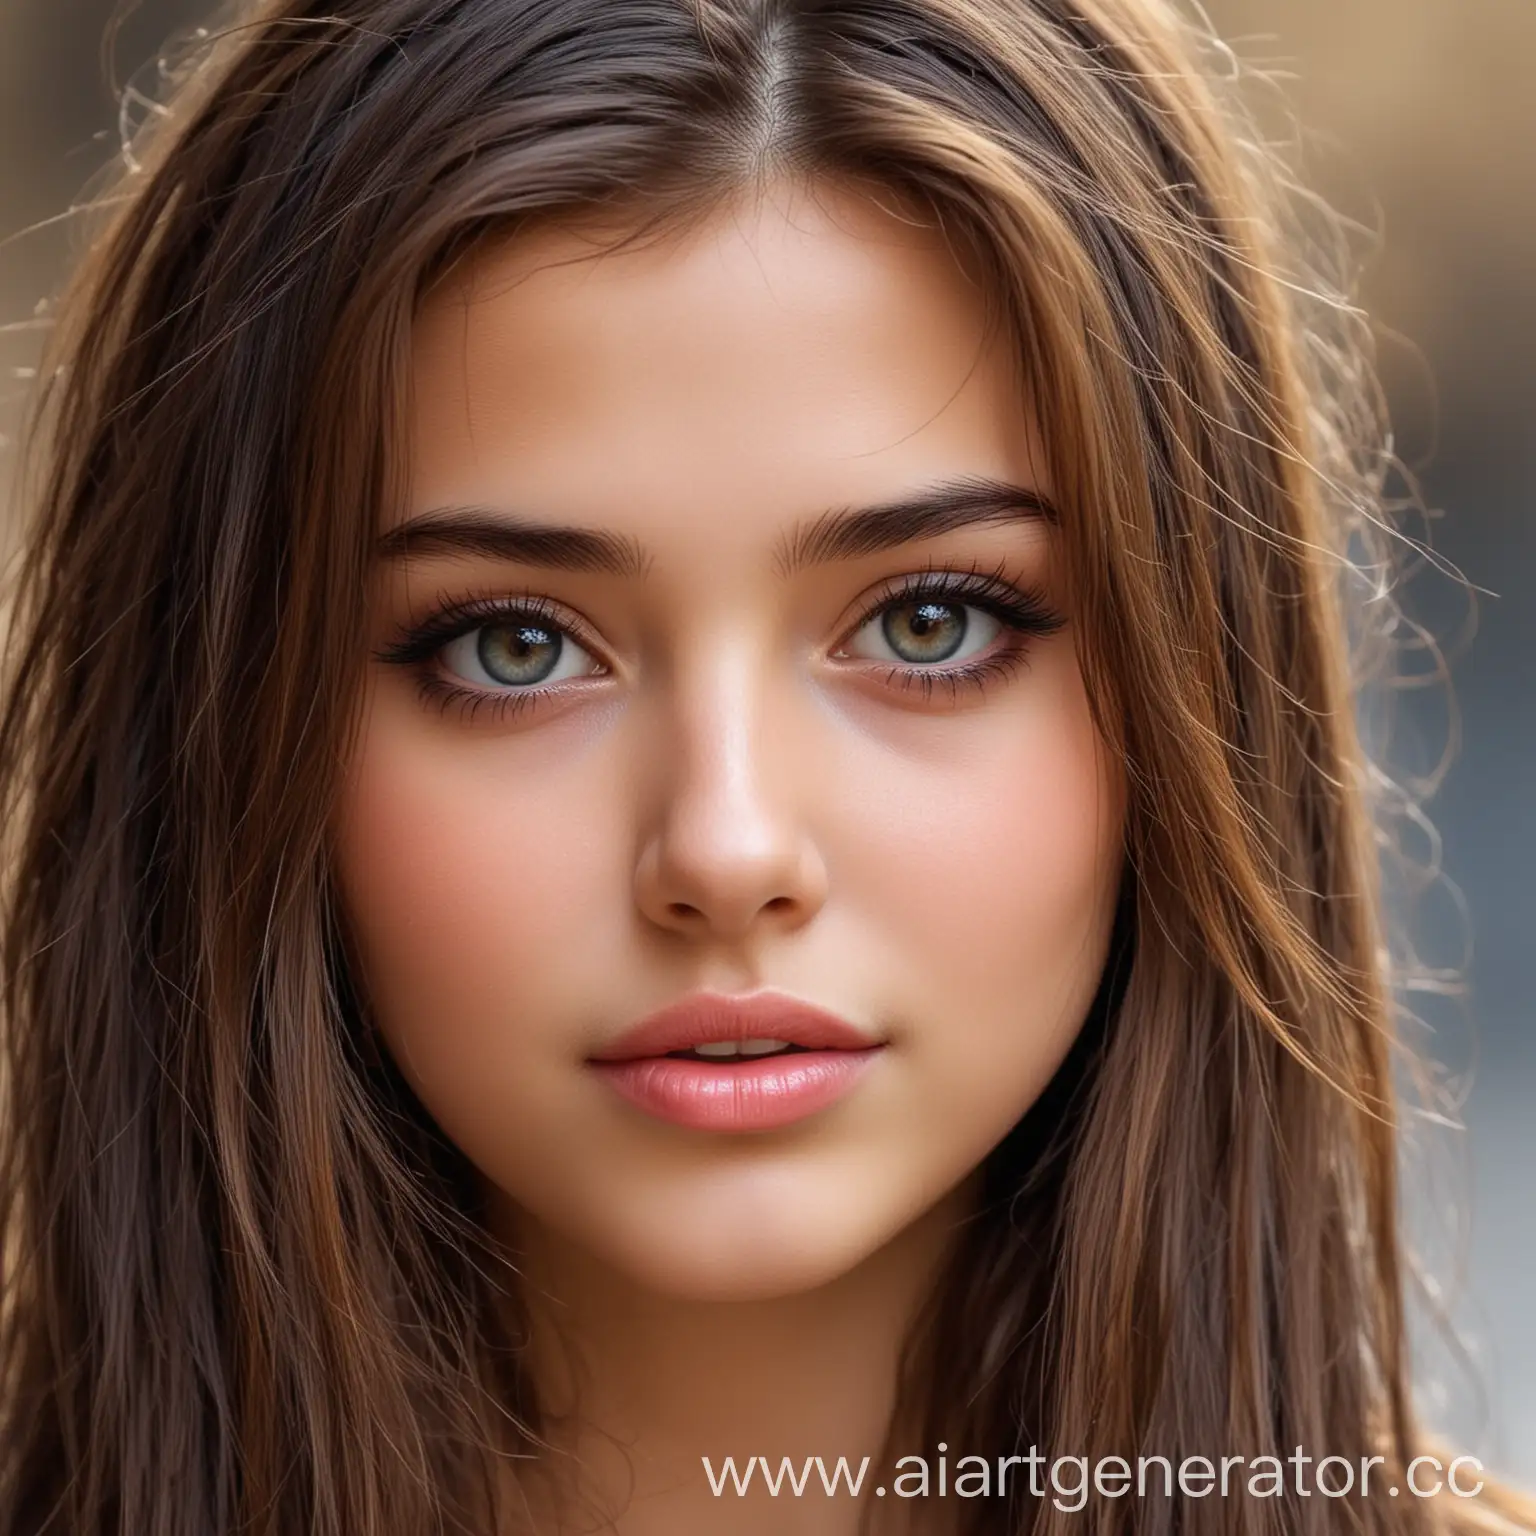 Captivating-Portrait-of-a-Radiant-Girl-with-Stunning-Beauty